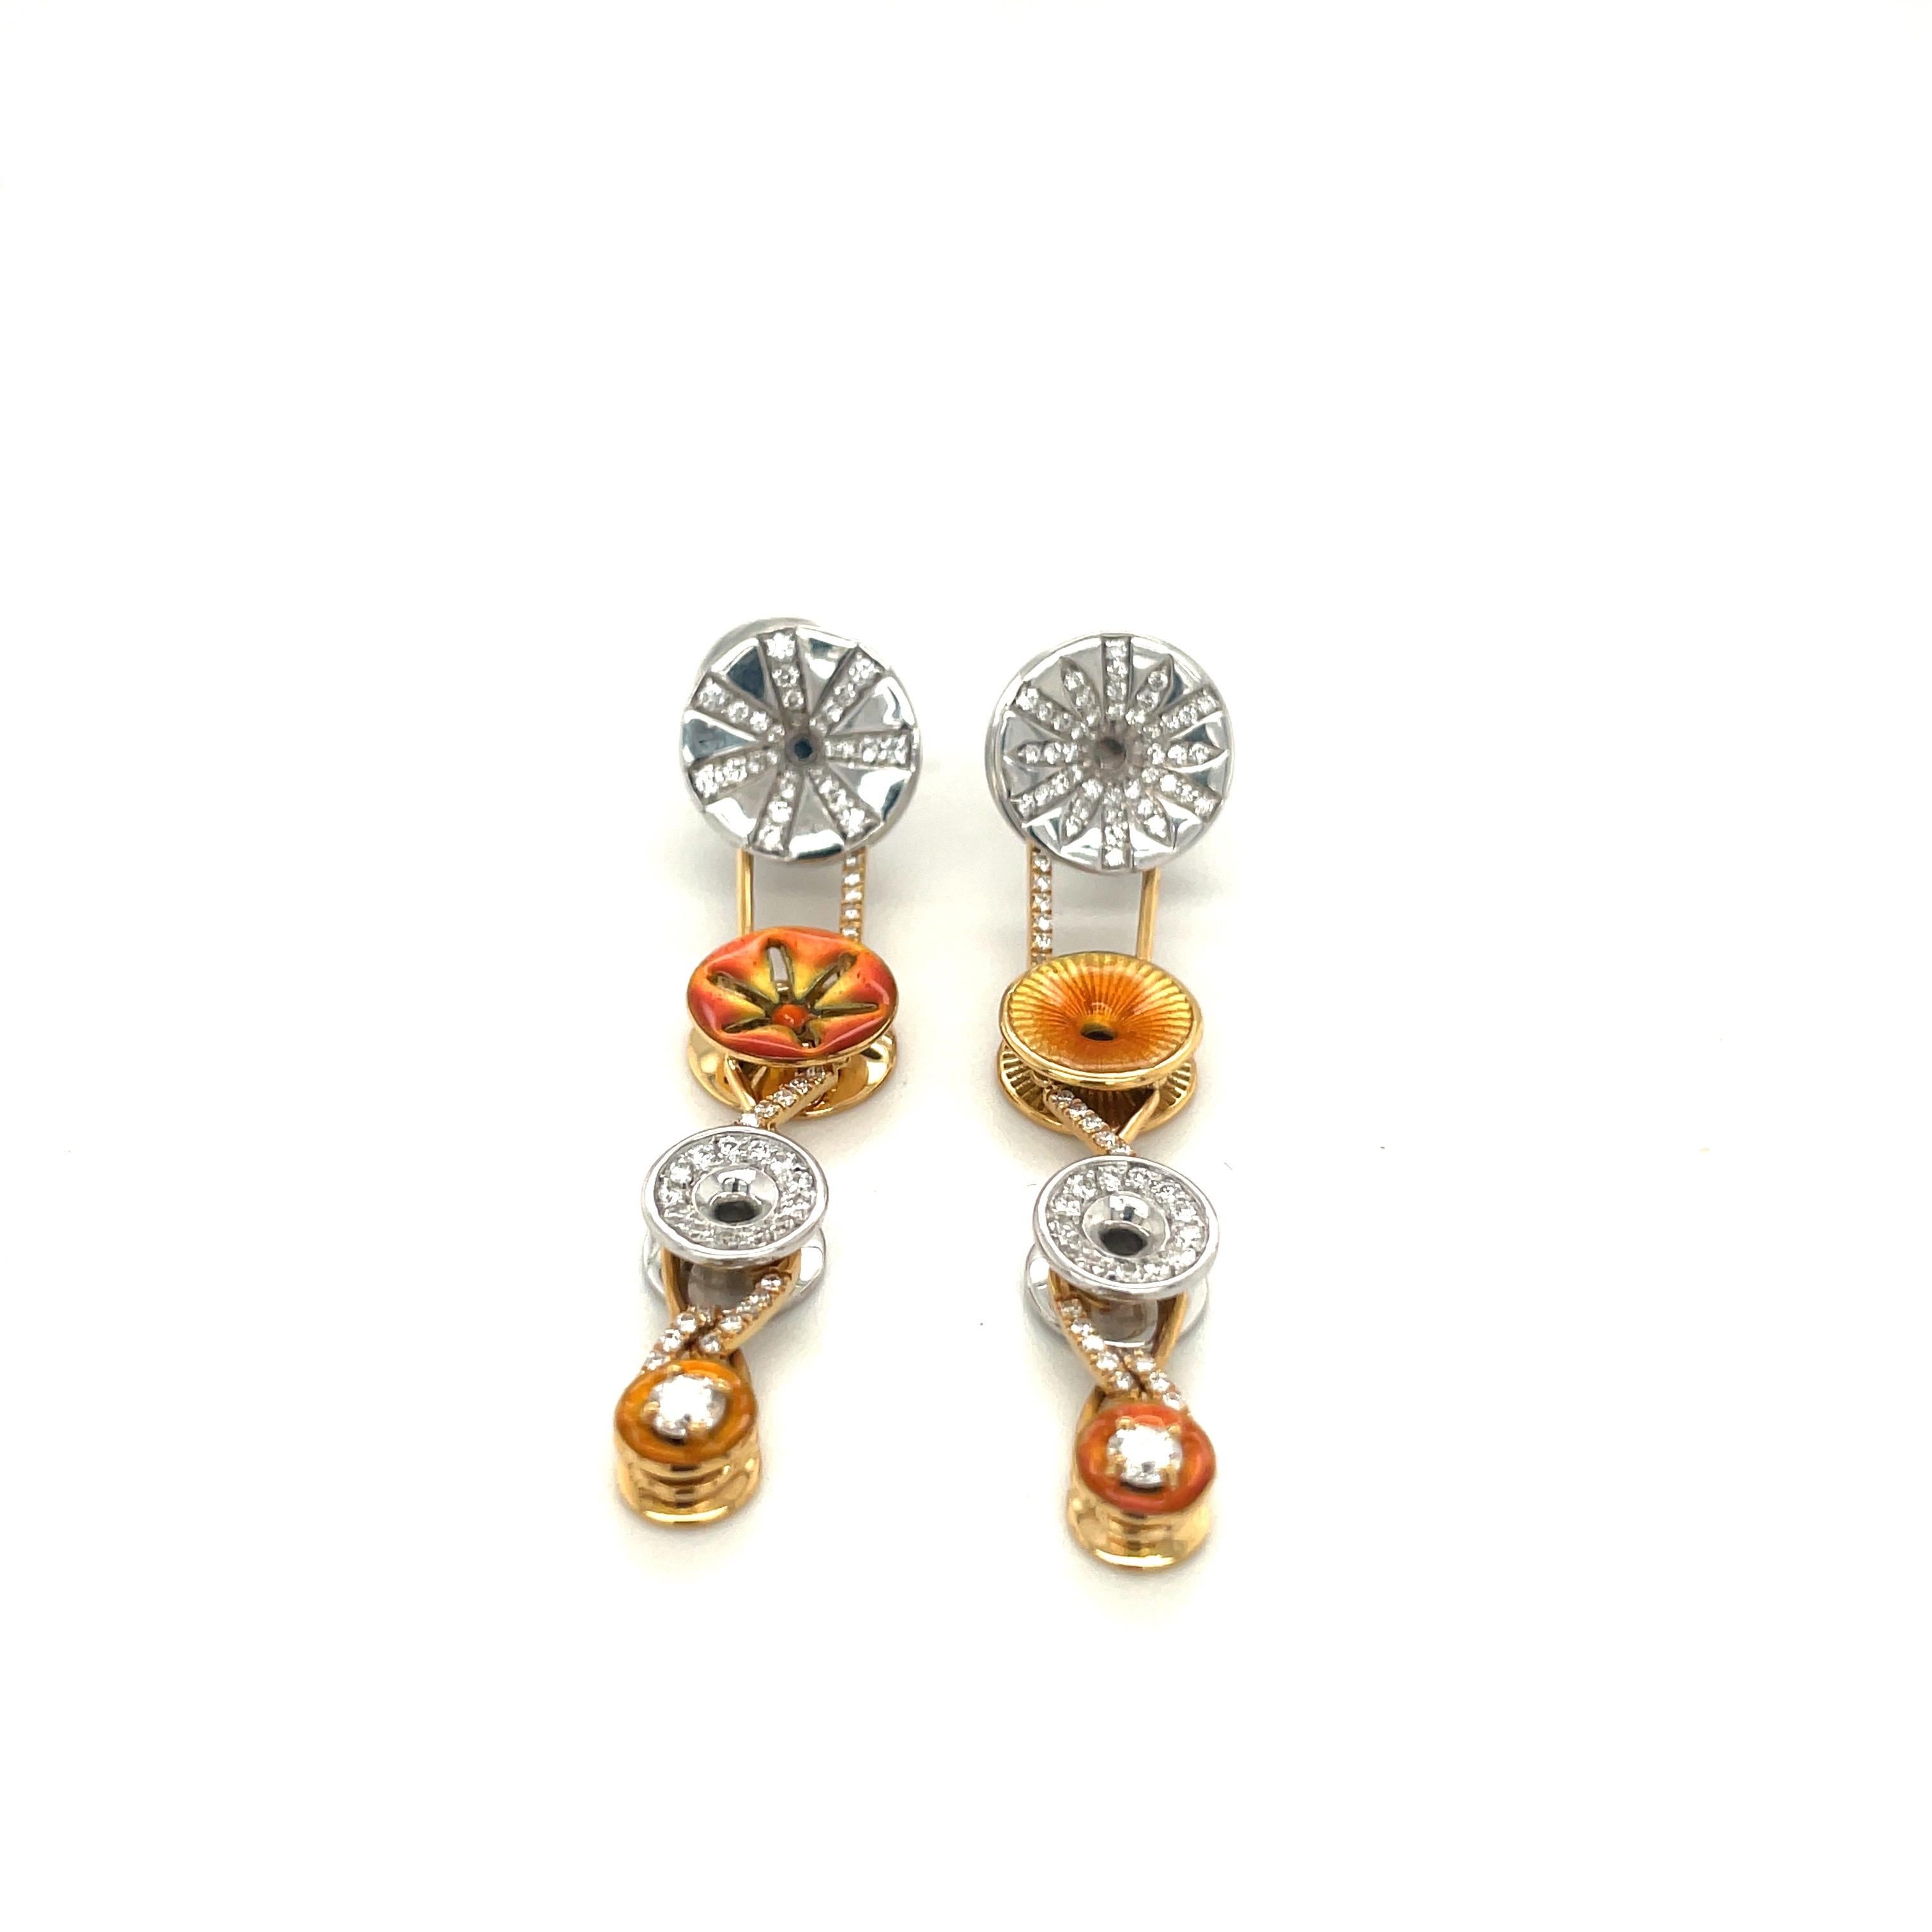 Round Cut Bagues Masriera 18KT Yellow & White Gold 0.93Ct Diamond and Enamel Earrings